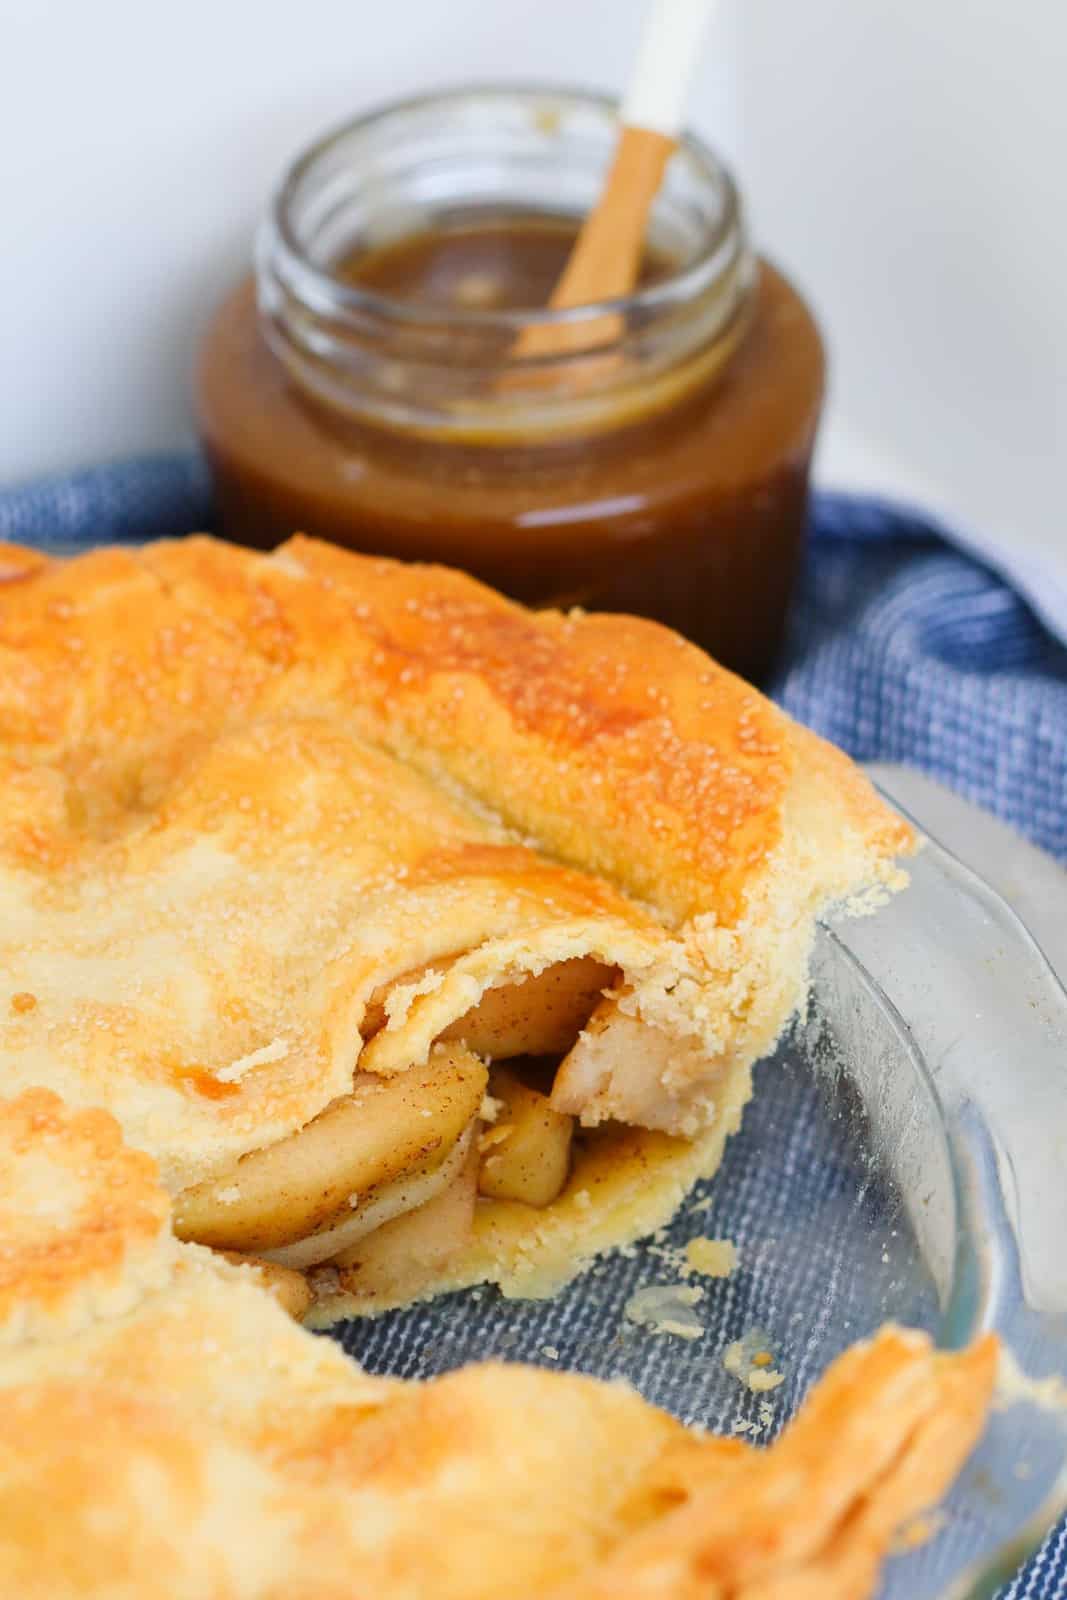 An apple pie with flaky pastry and apple filling in a baking dish.